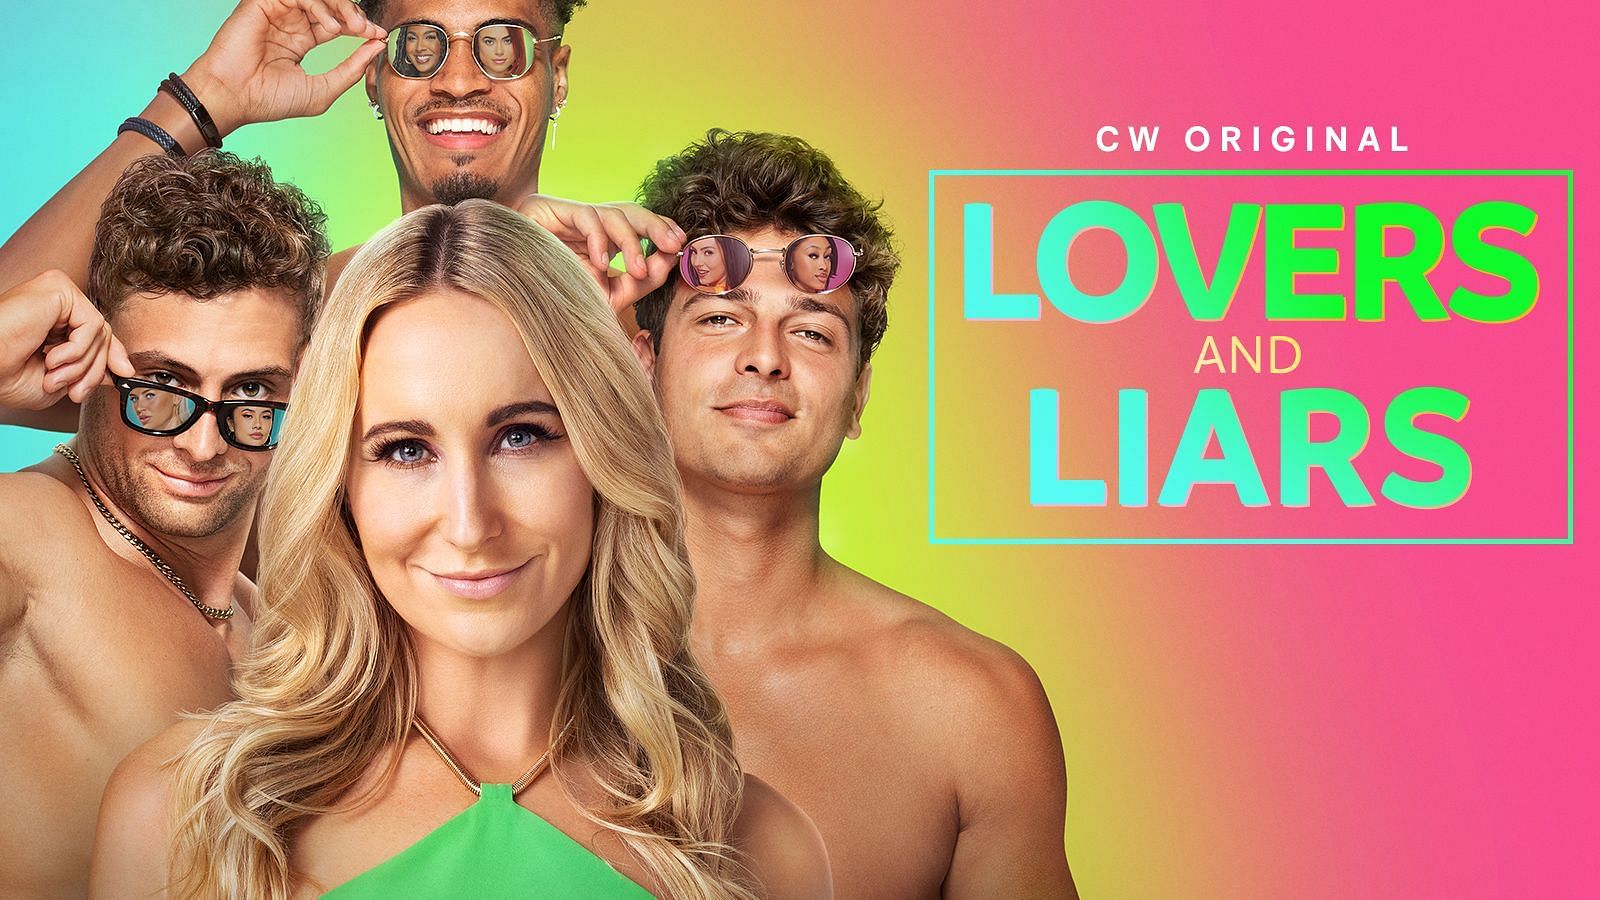 Lovers and Liars (Image via The CW website)